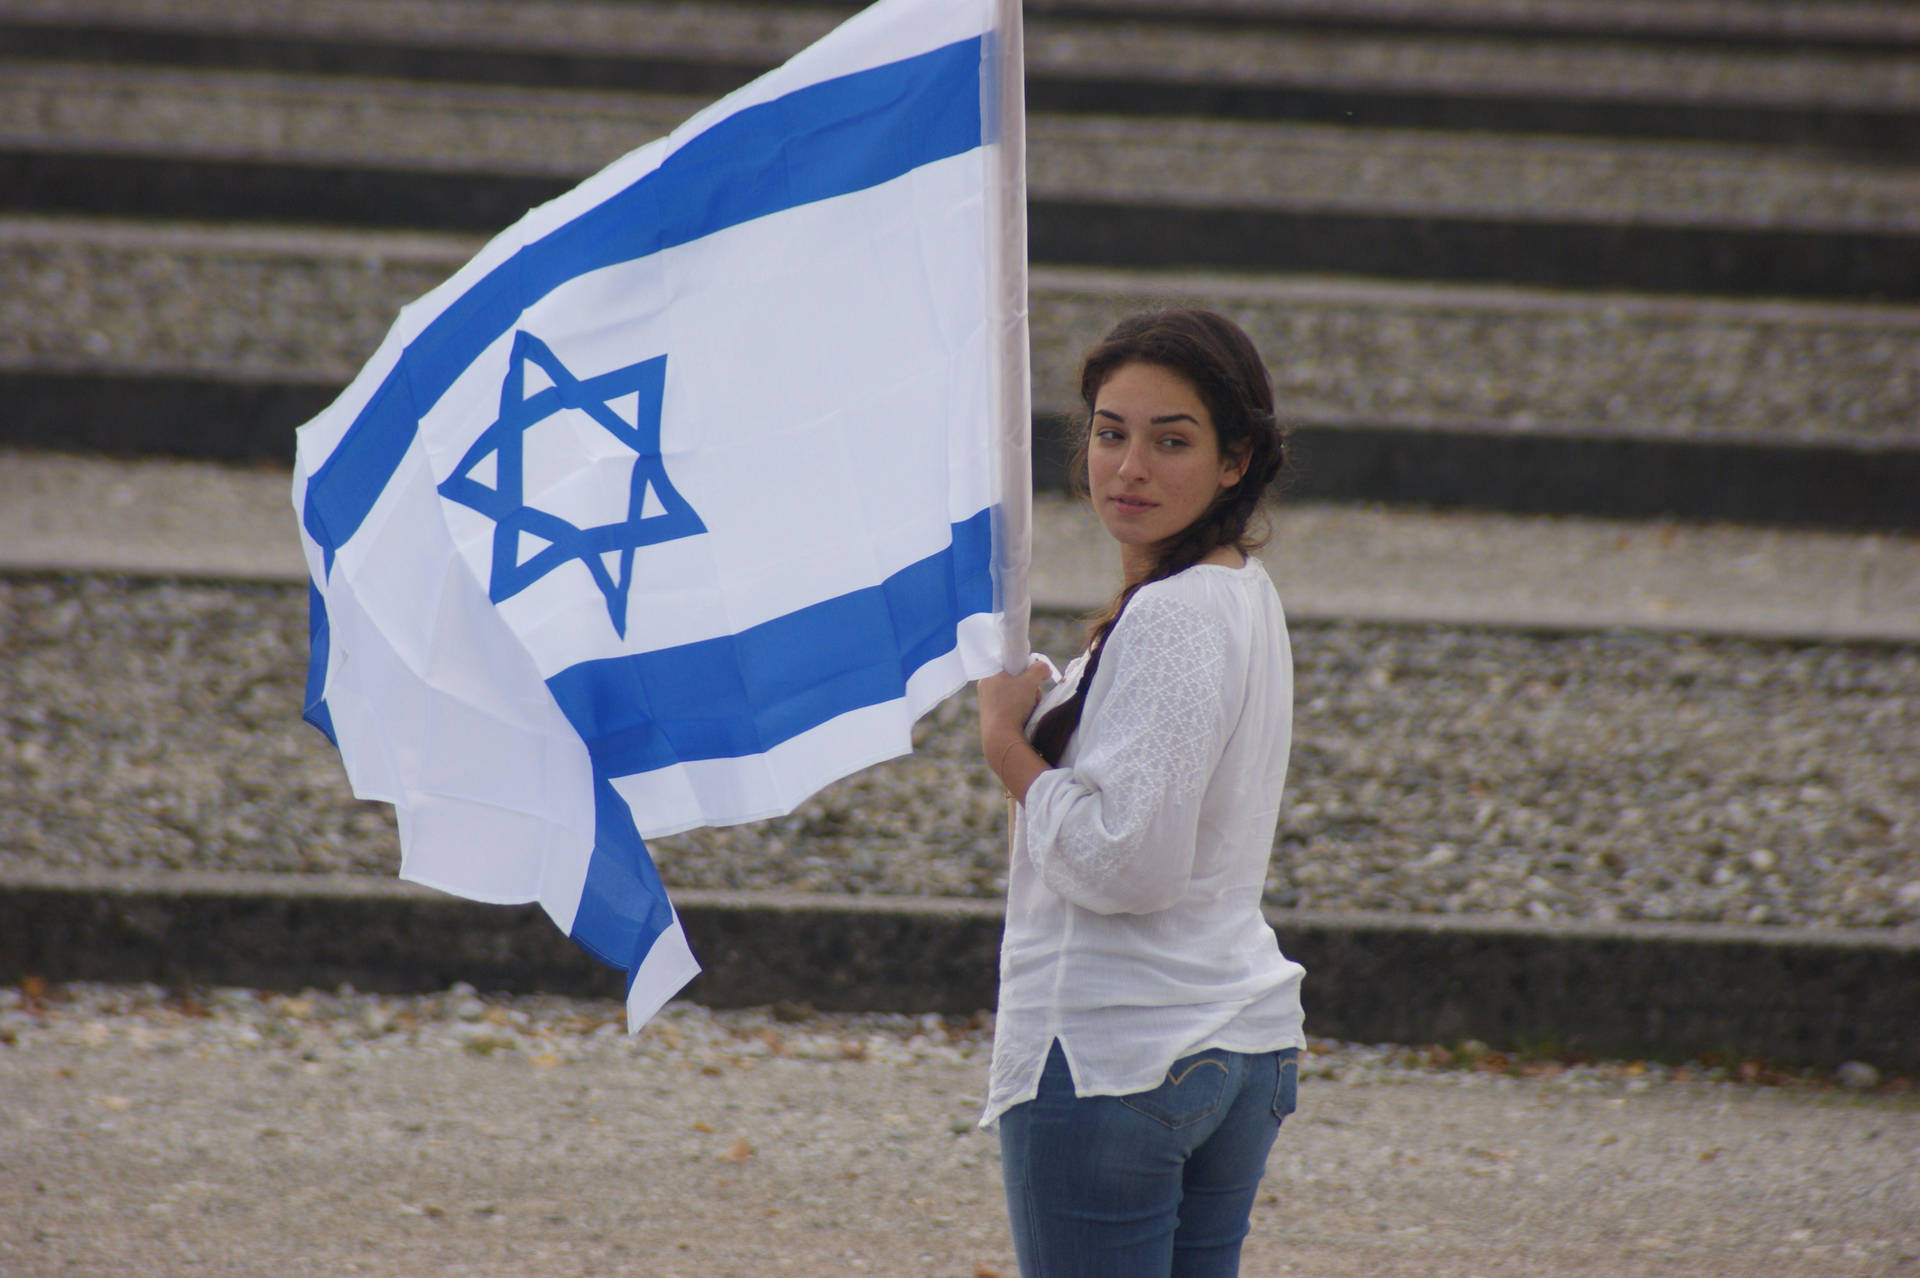 A Patriotic Display With An Israeli Lady And The Israel Flag. Background